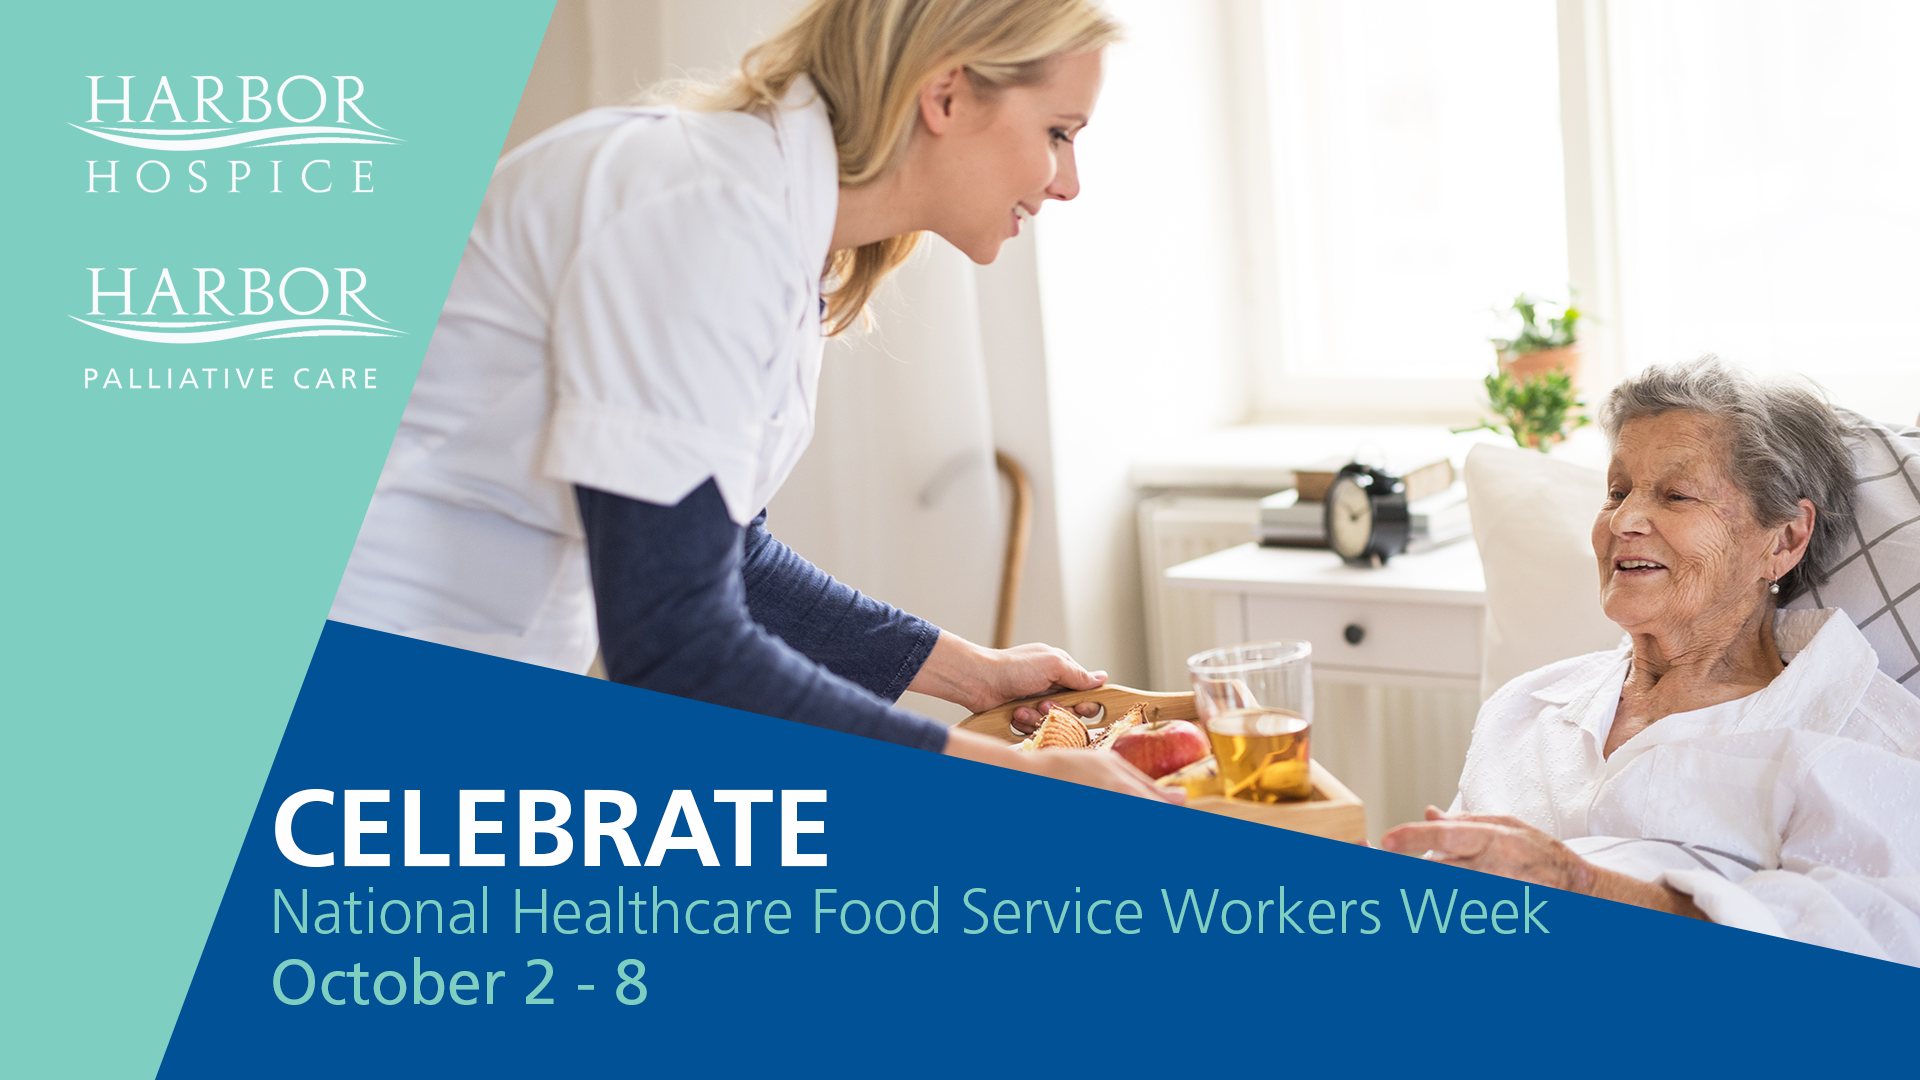 Announcement National Week Month Healthcare Food Service week - Celebrating Healthcare Food Service Workers. It's their week!